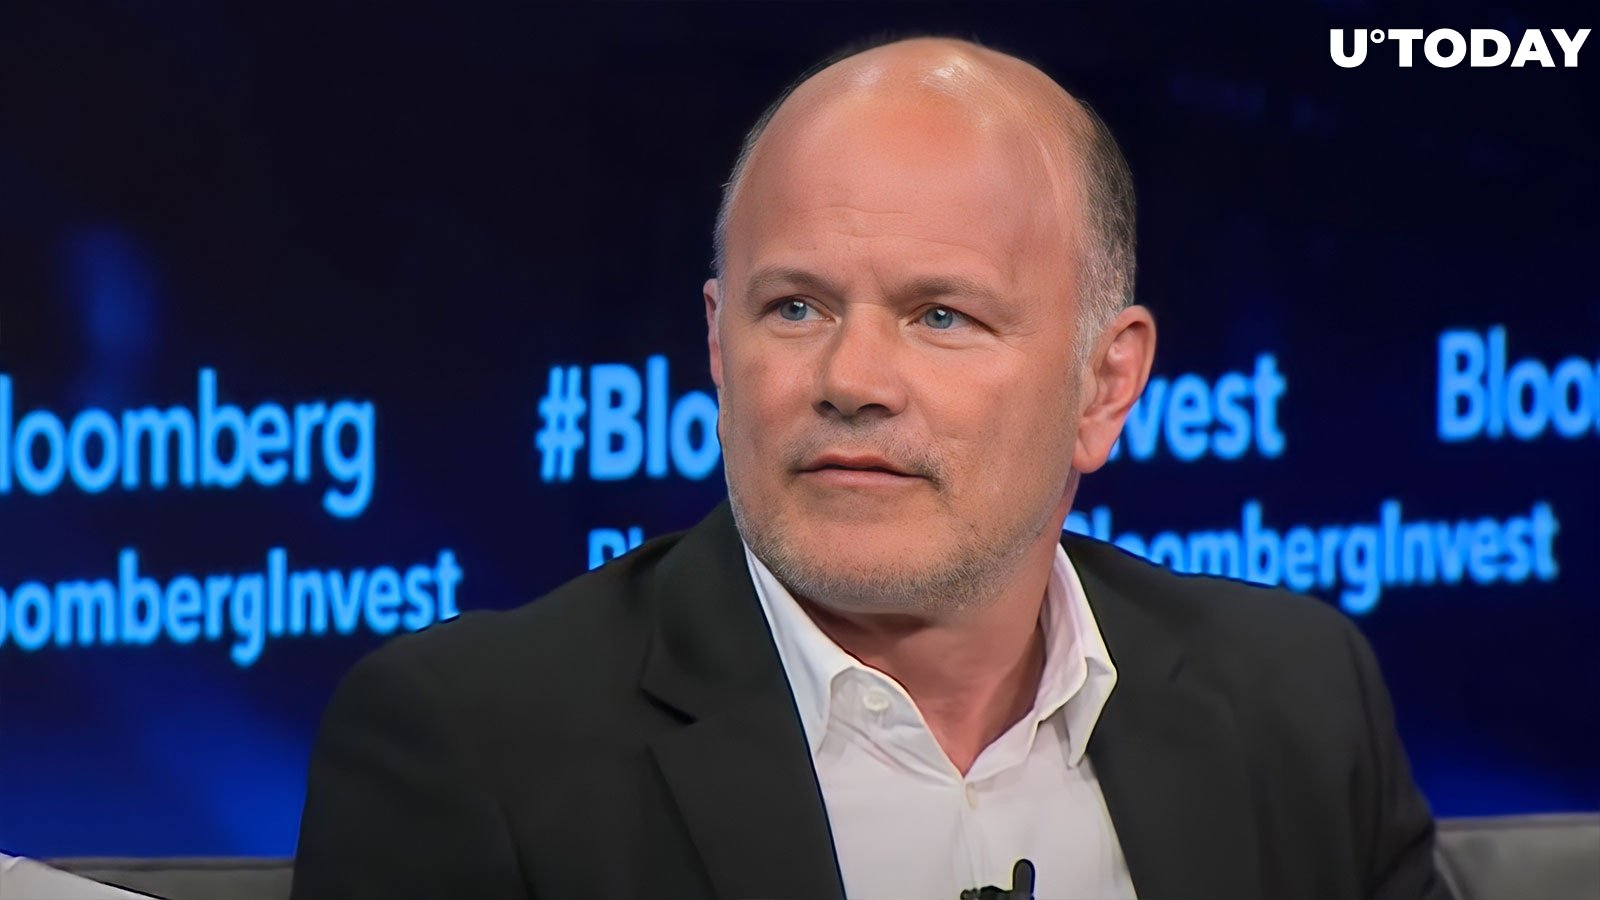 Here's When Bitcoin Will Take Back Off, According to Mike Novogratz